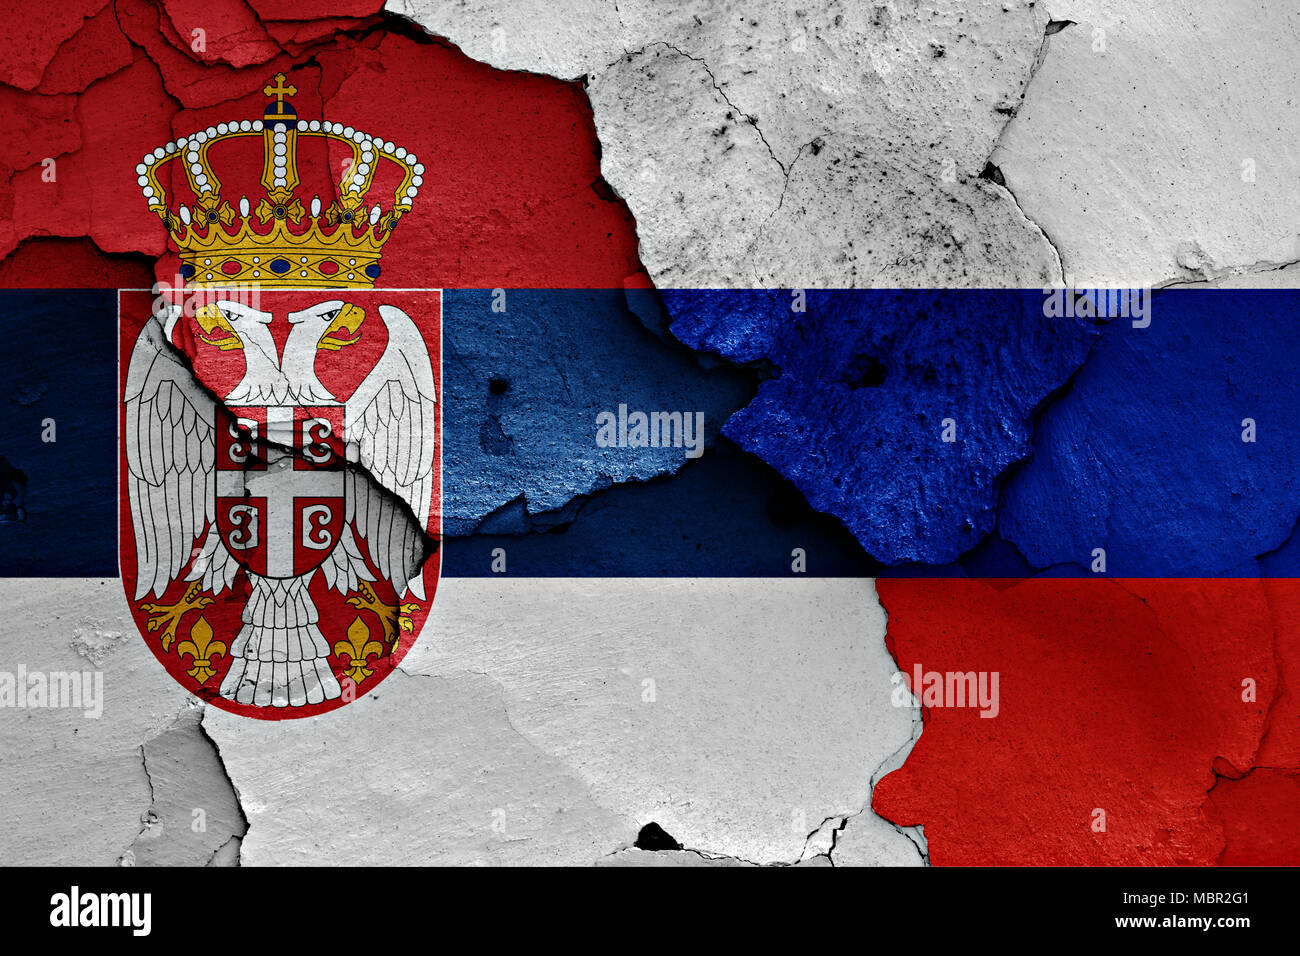 Flags Of Serbia And Russia Painted On Cracked Wall Stock Photo